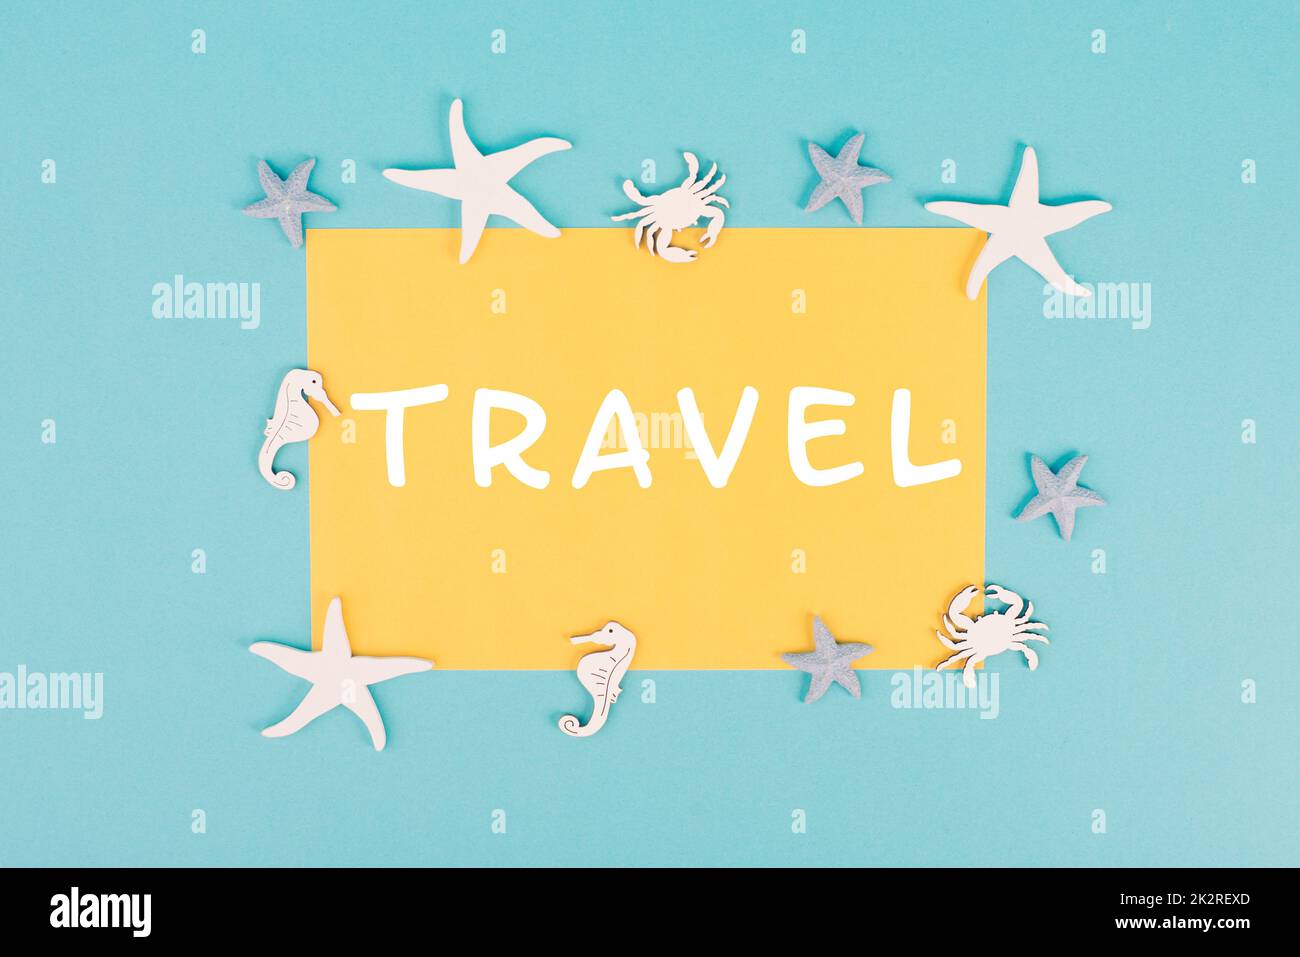 The word travel is standing on a yellow colored paper, sea stars, seahorses and crab bulding a frame, summer vacation, tourism destination Stock Photo